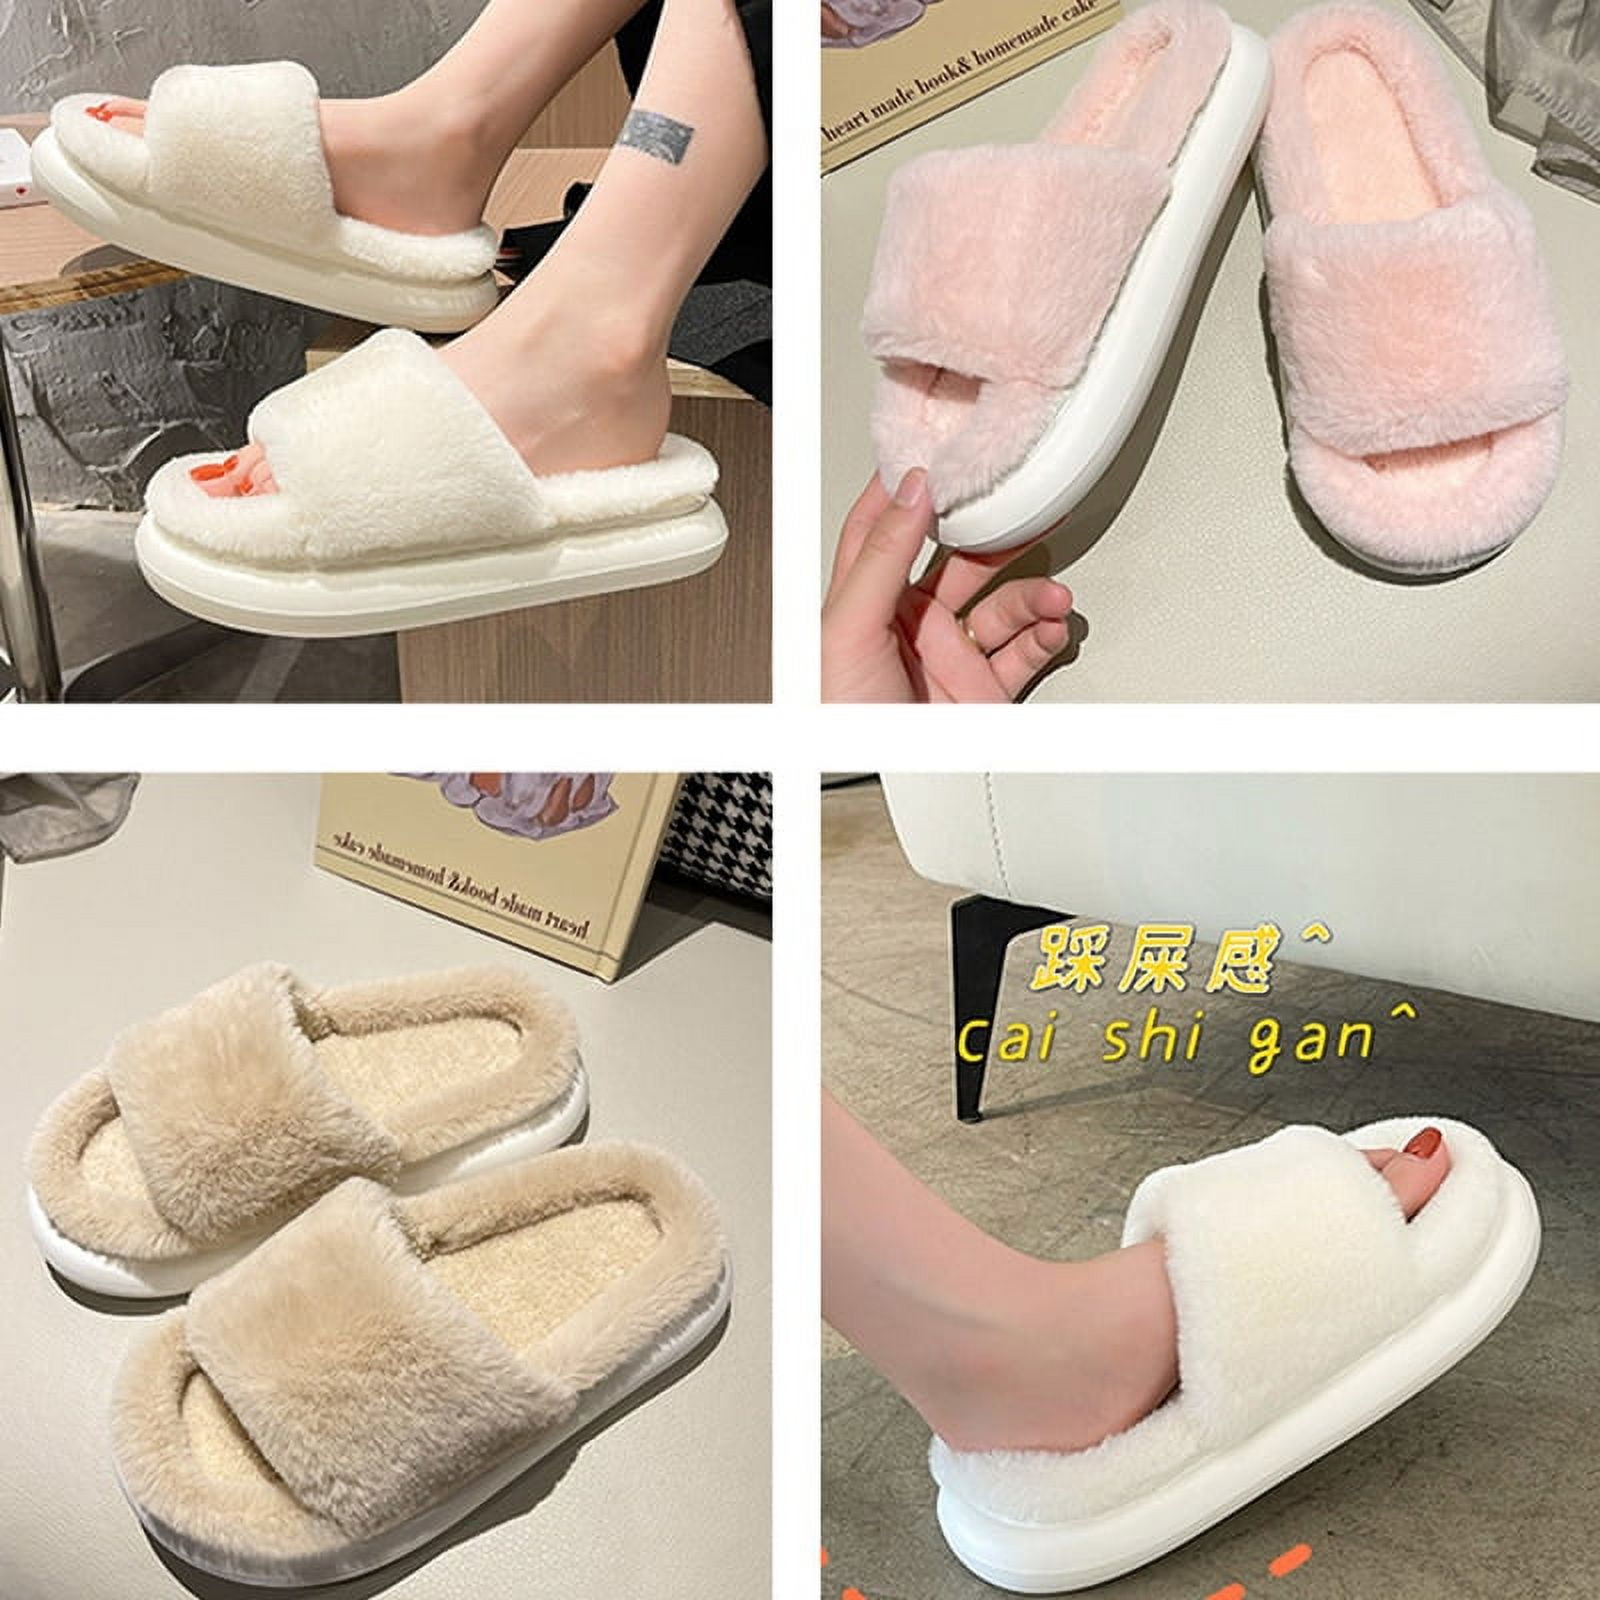 CoCopeaunt New Warm Fluffy Slippers Winter House Fluffy Fur Slippers Home Slides Flat Fashion Indoor Flip Flops Shoes Ladies - Walmart.com